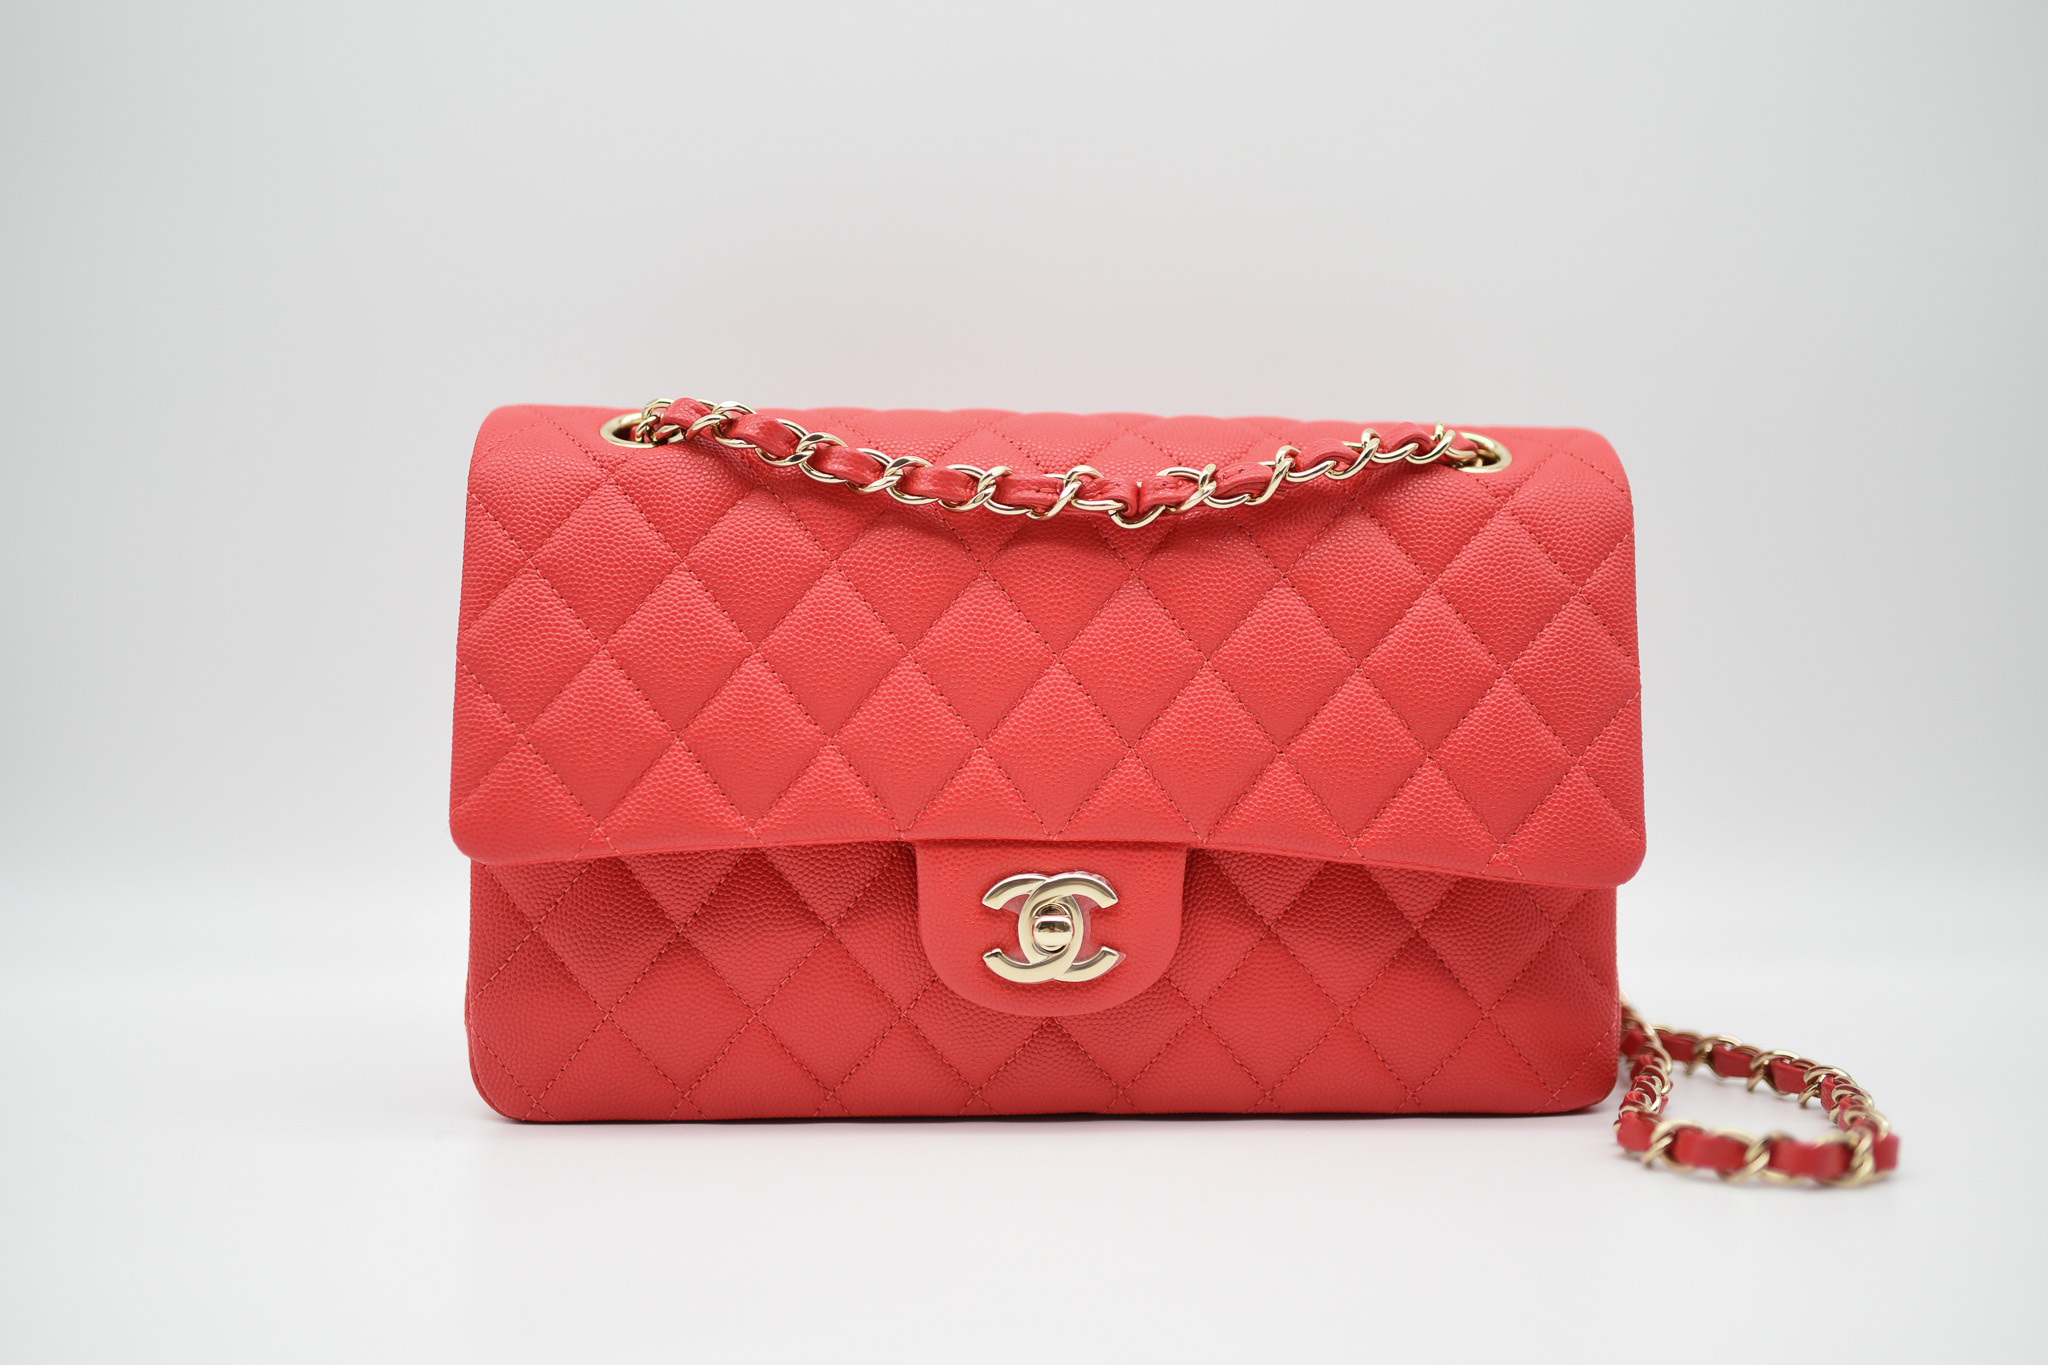 Chanel Classic Medium Flap, 22S Red Caviar with Gold Hardware, New in Box  GA006